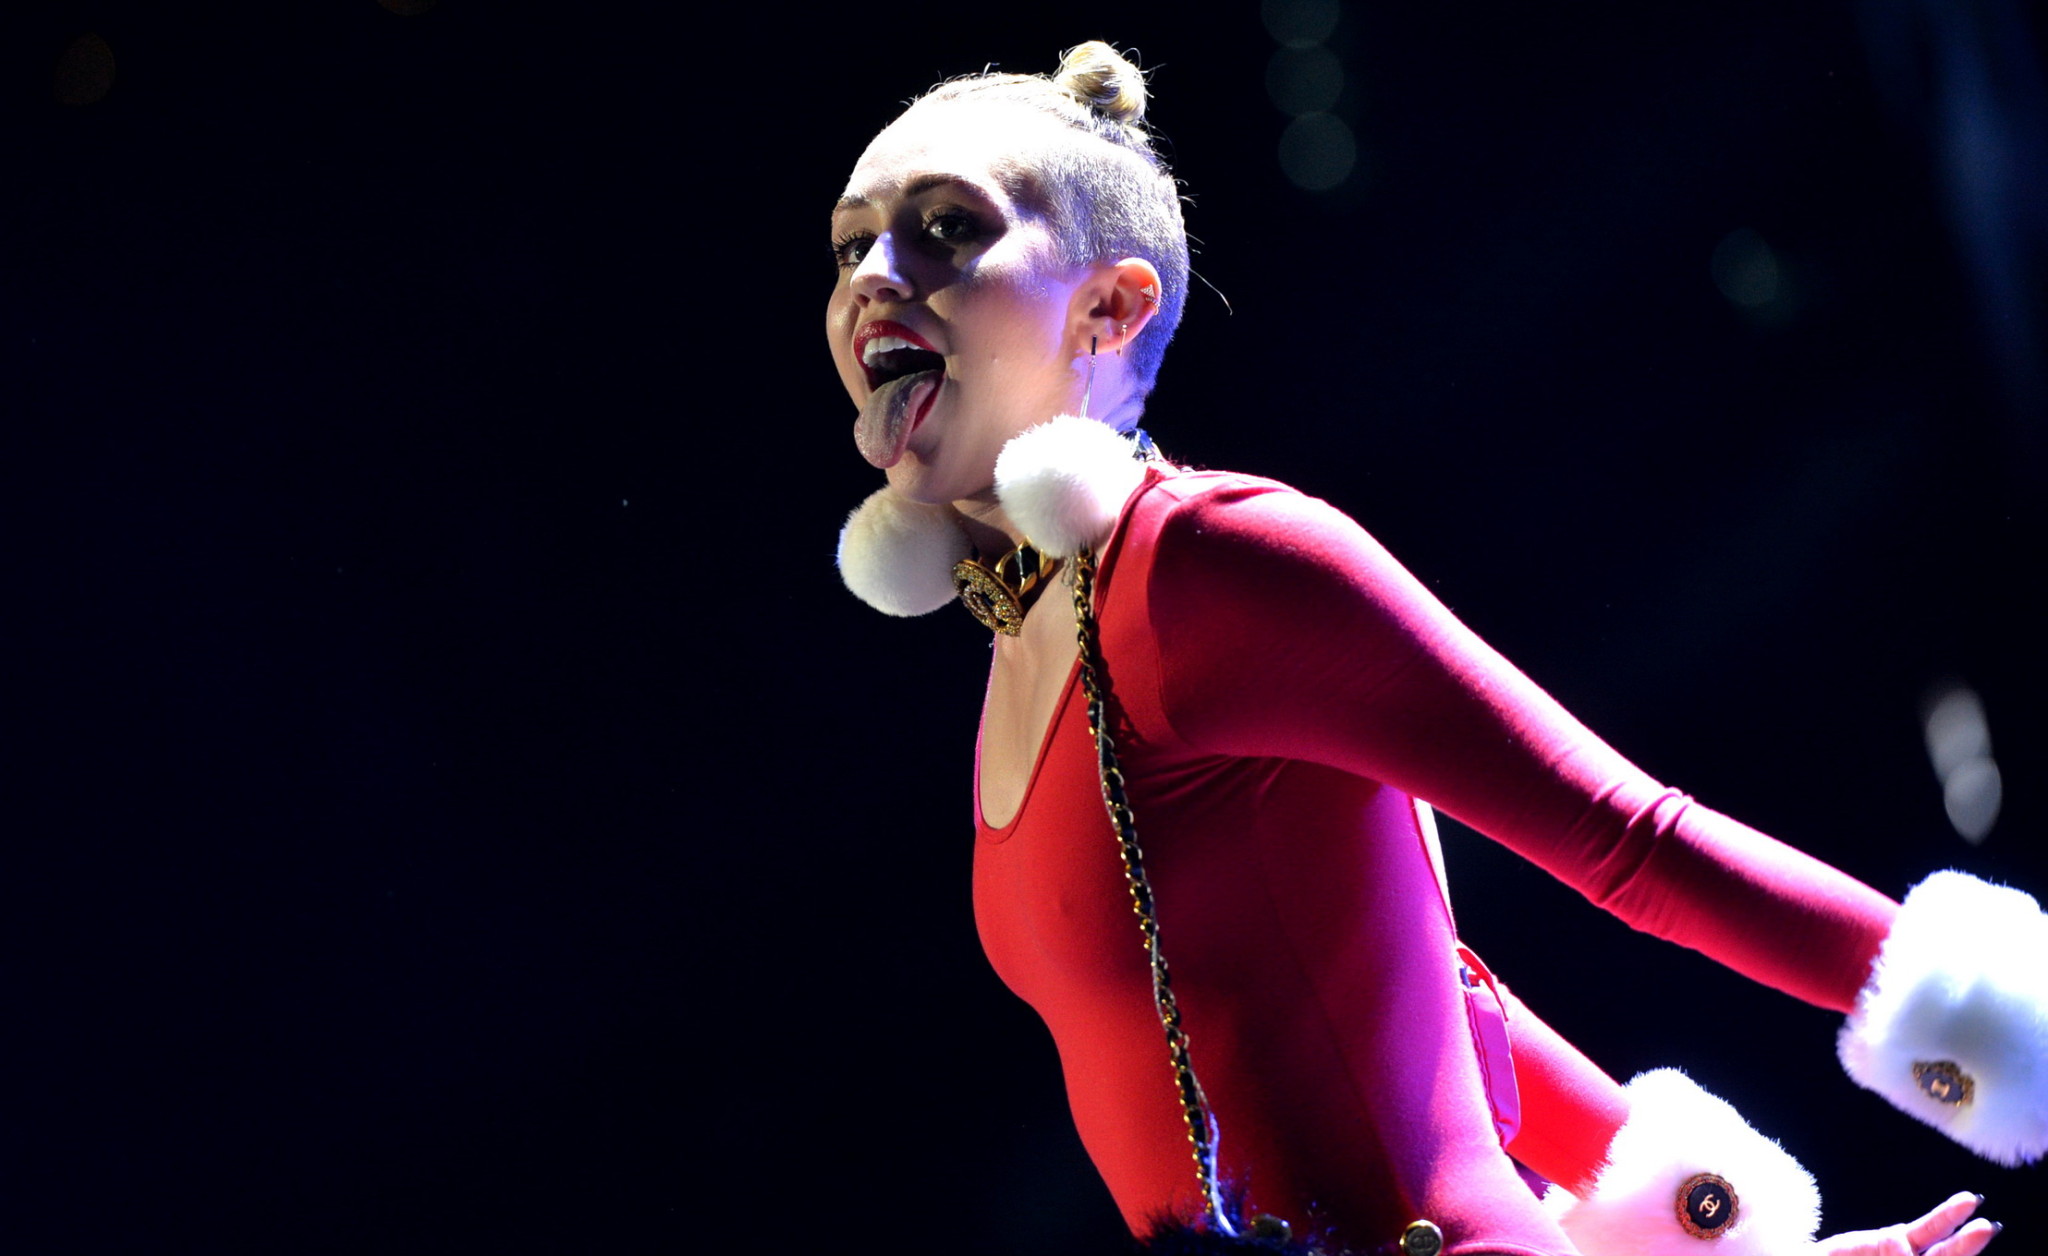 Miley Cyrus shows off pokies and ass wearing a red leotard on stage at 93.3 FLZ' #75209802